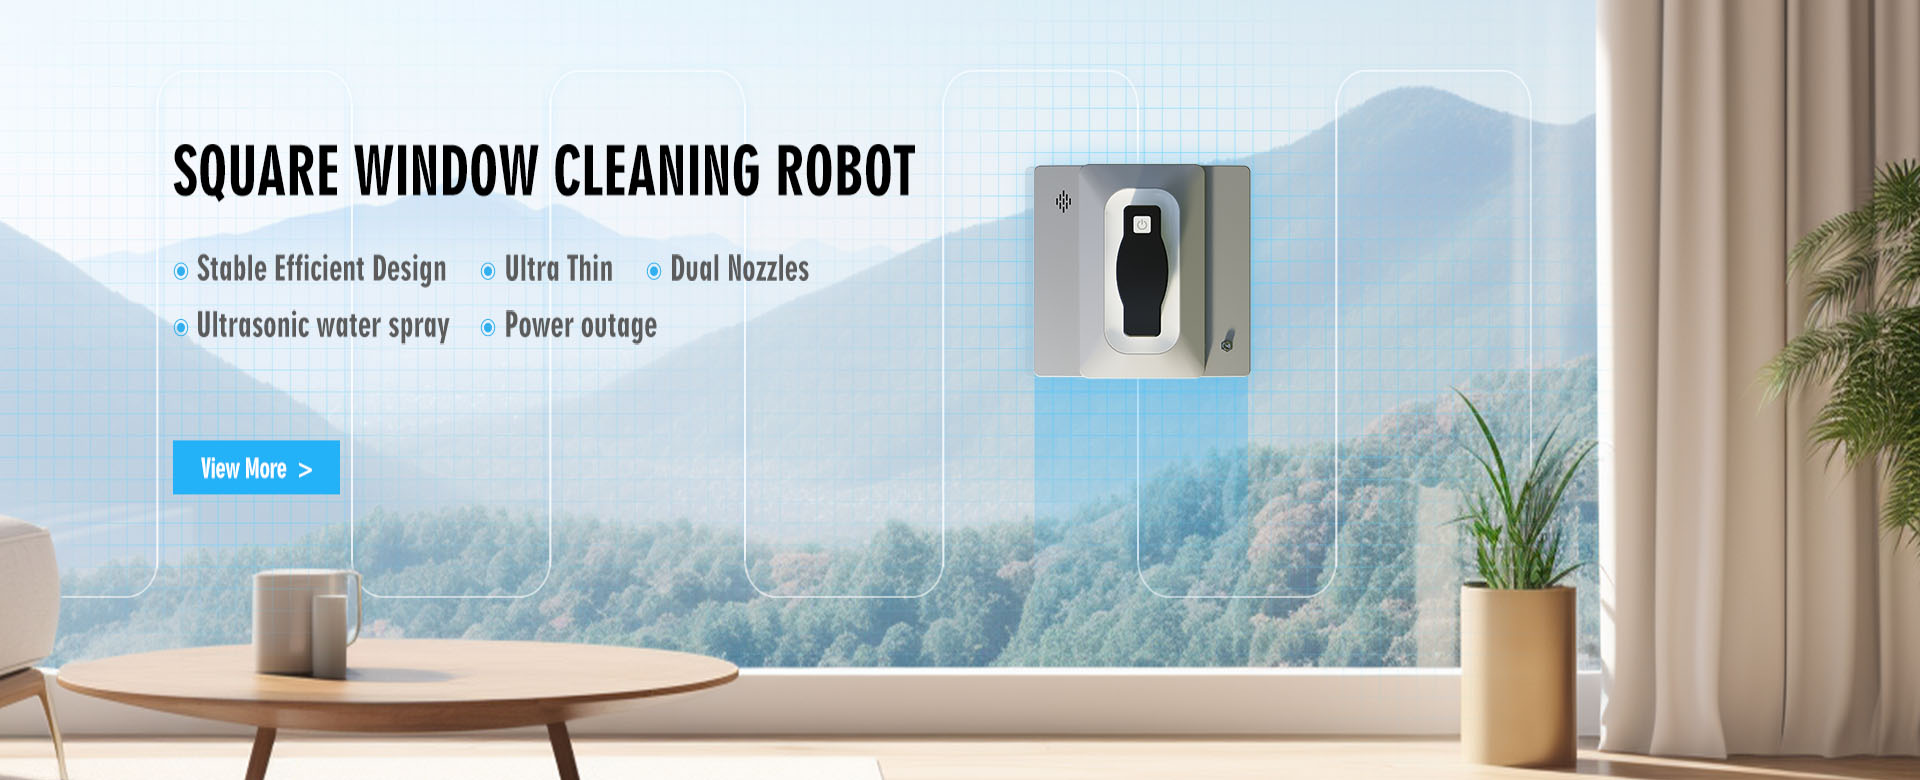 Square window cleaning robots new